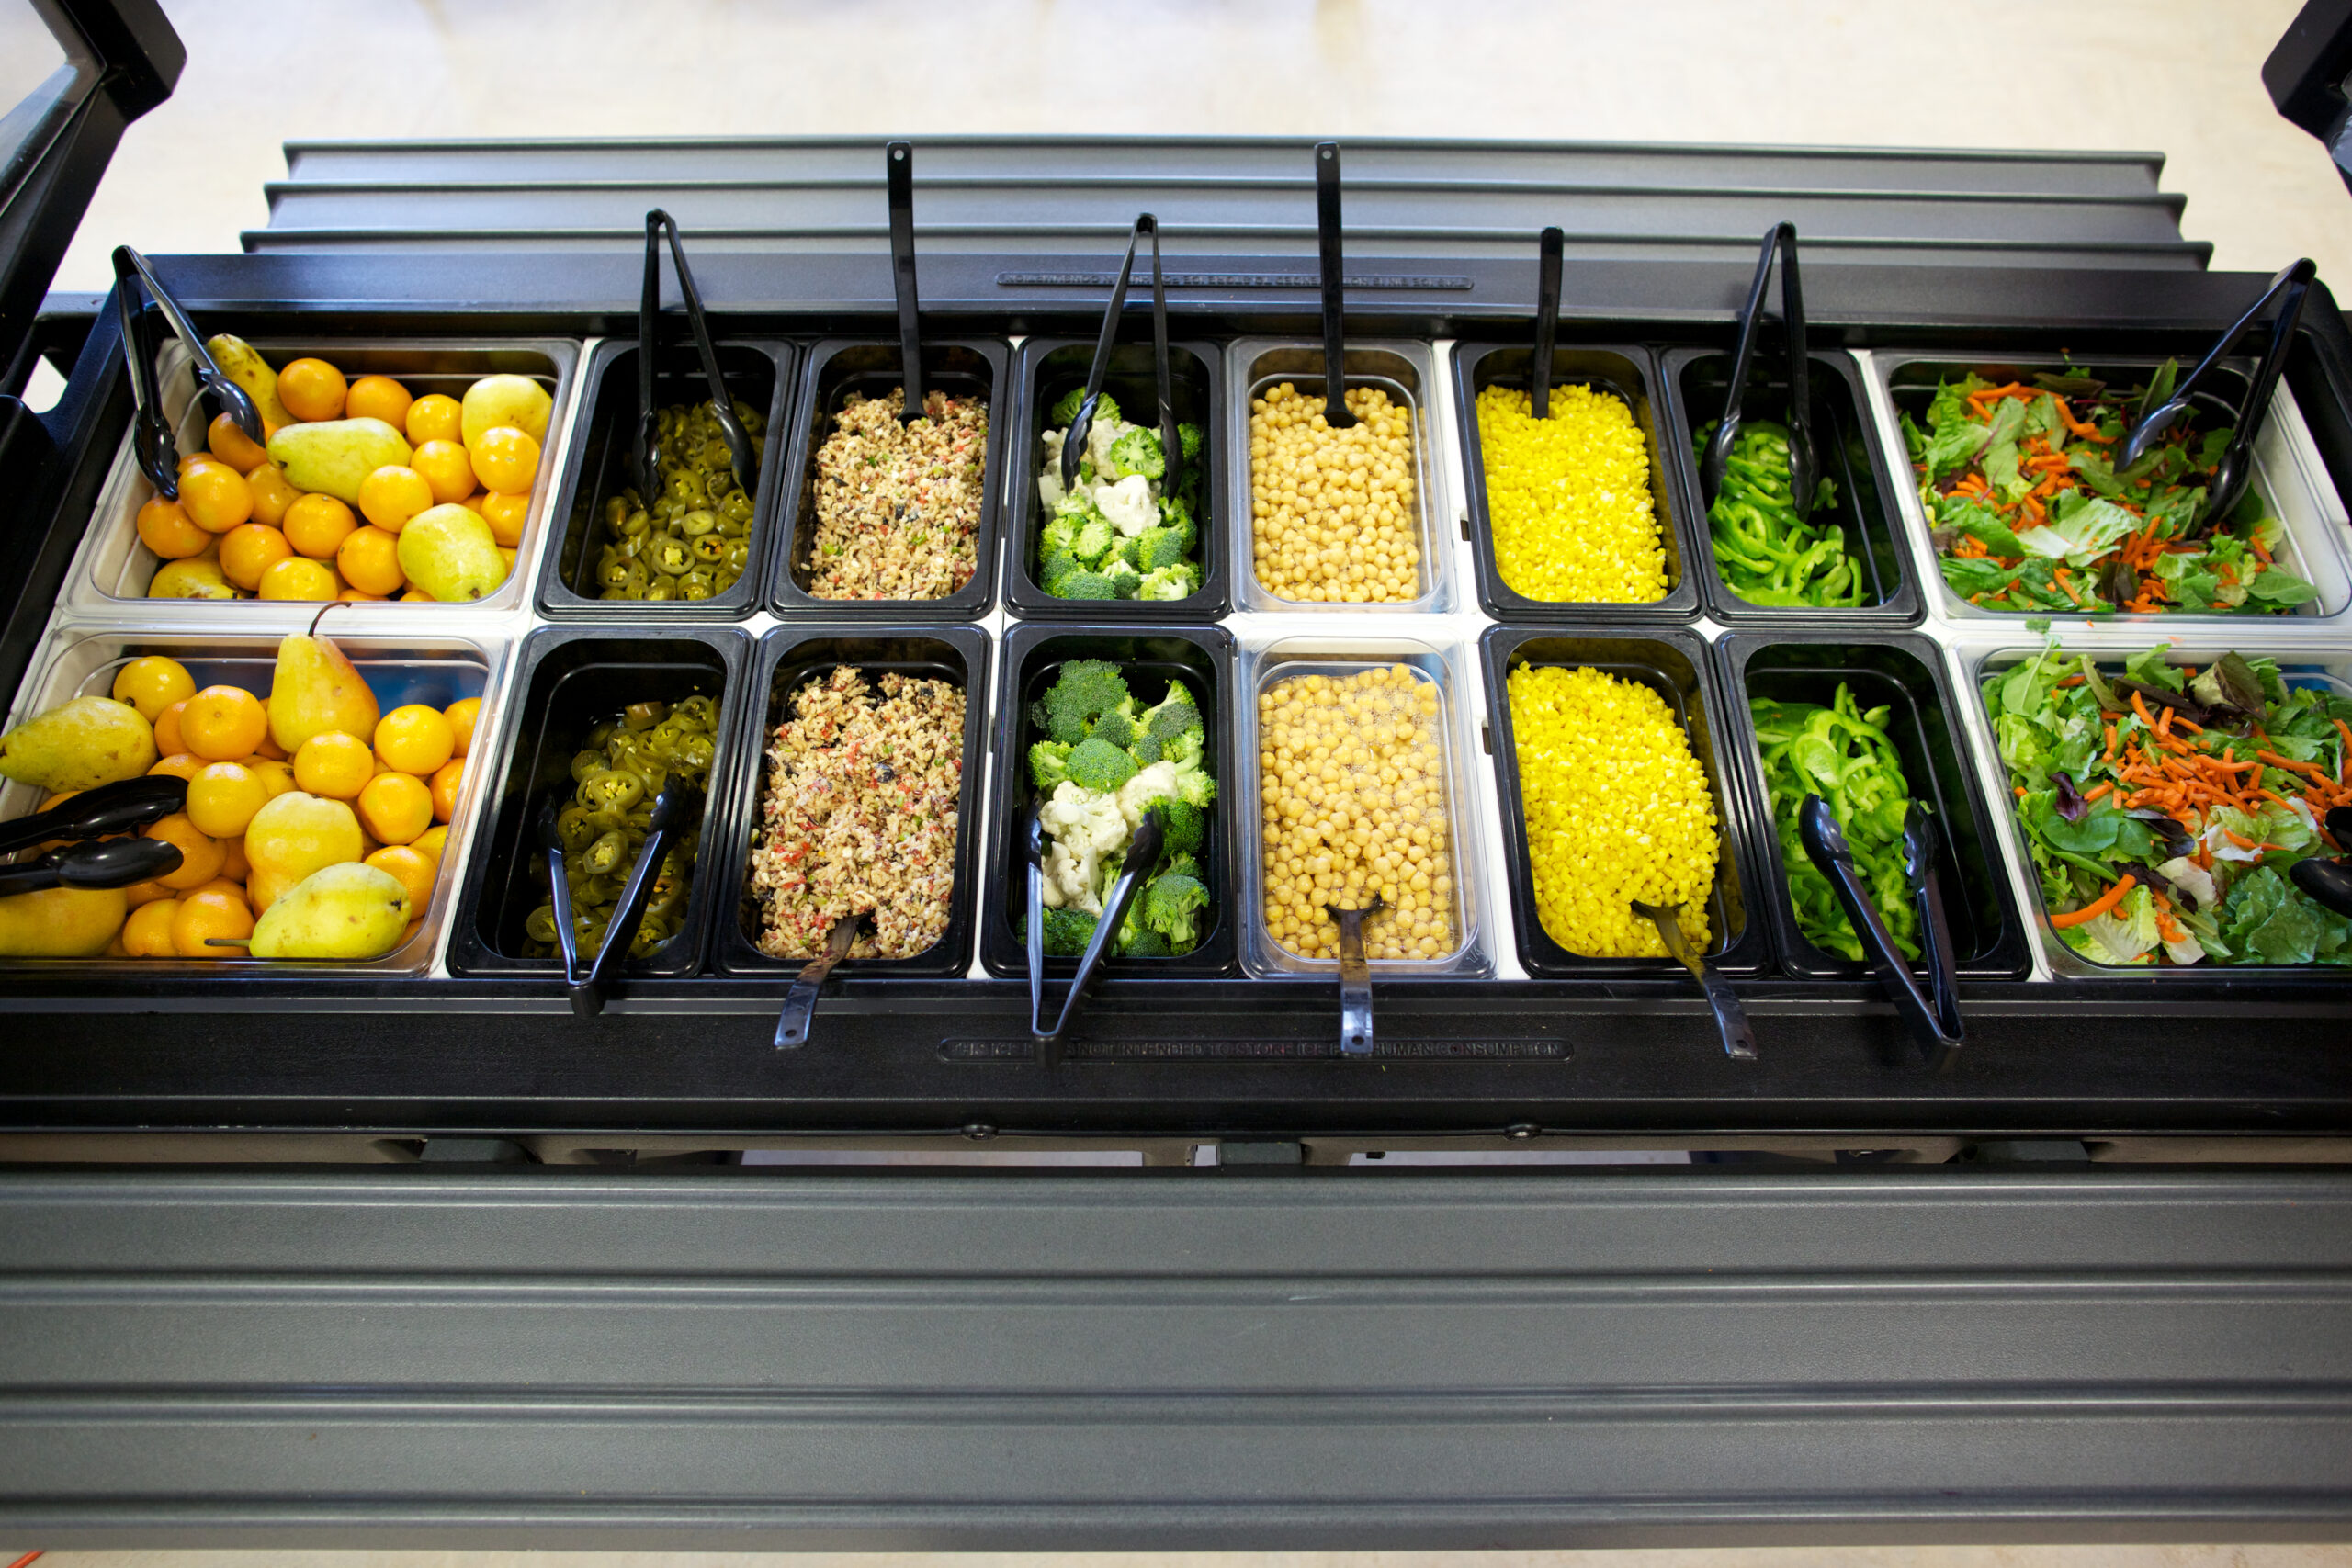 Salad Bars Brightening Up School Lunches in Michigan